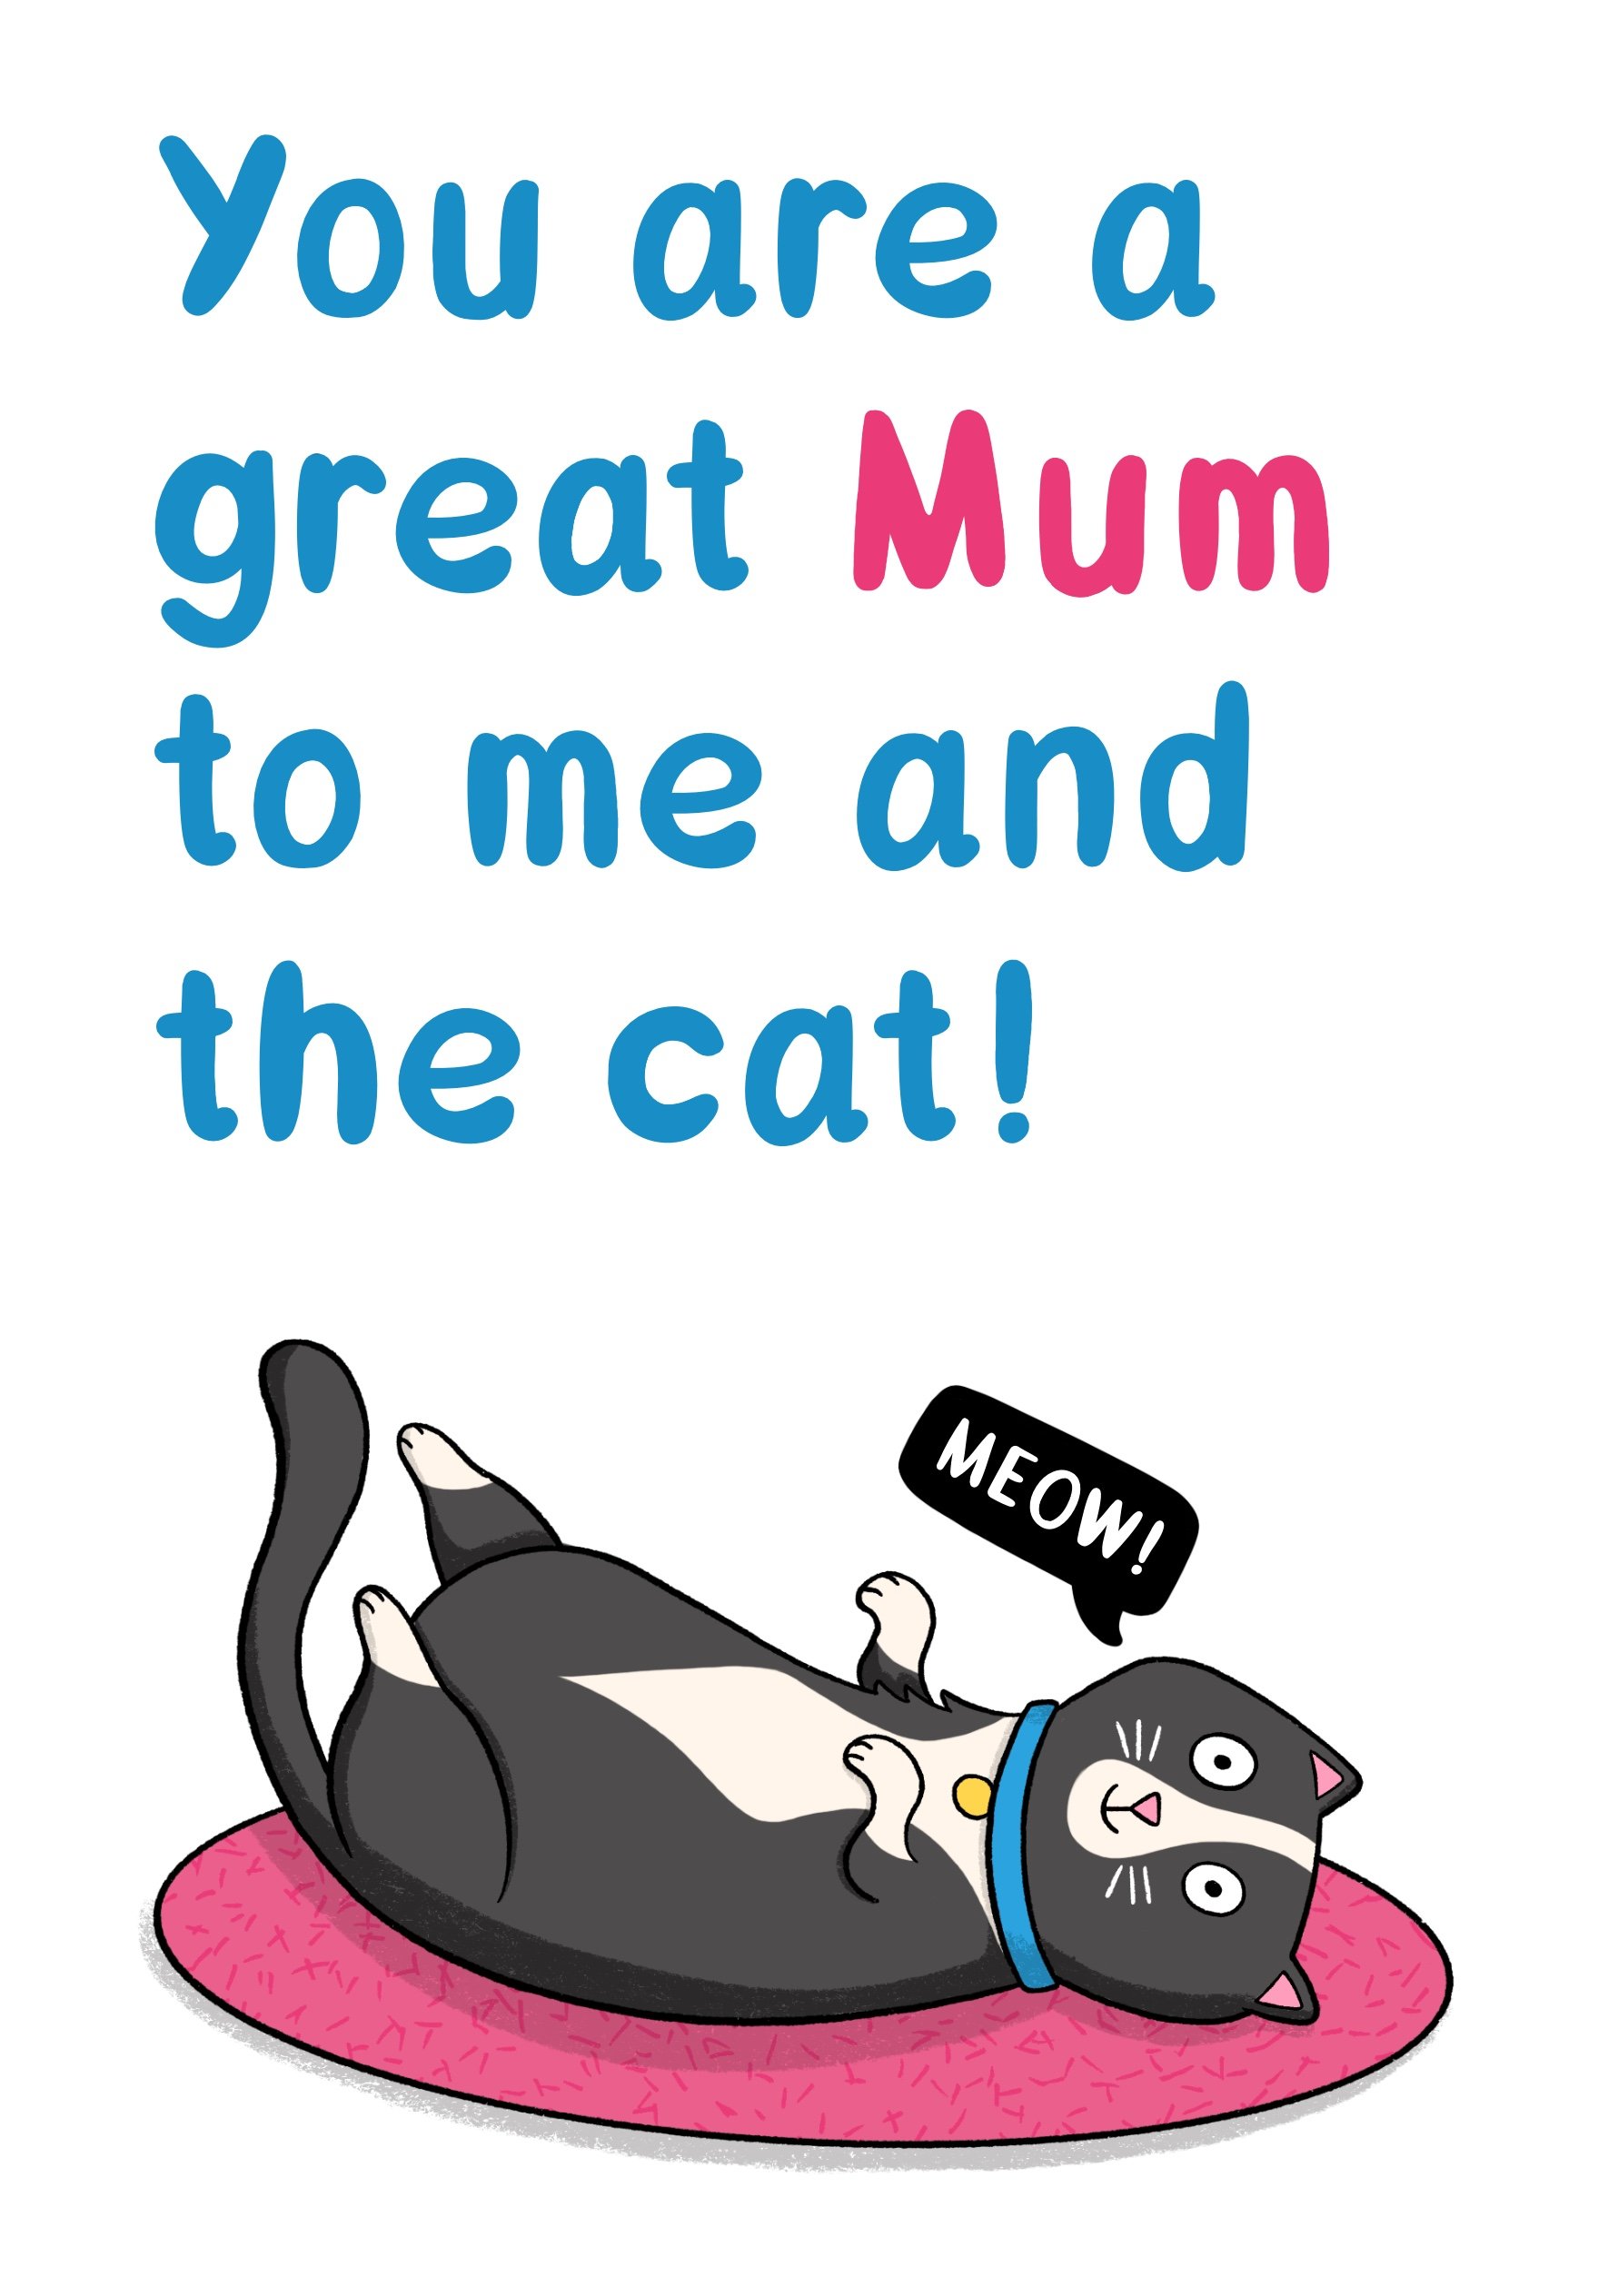 Great Mum to me and the Cat